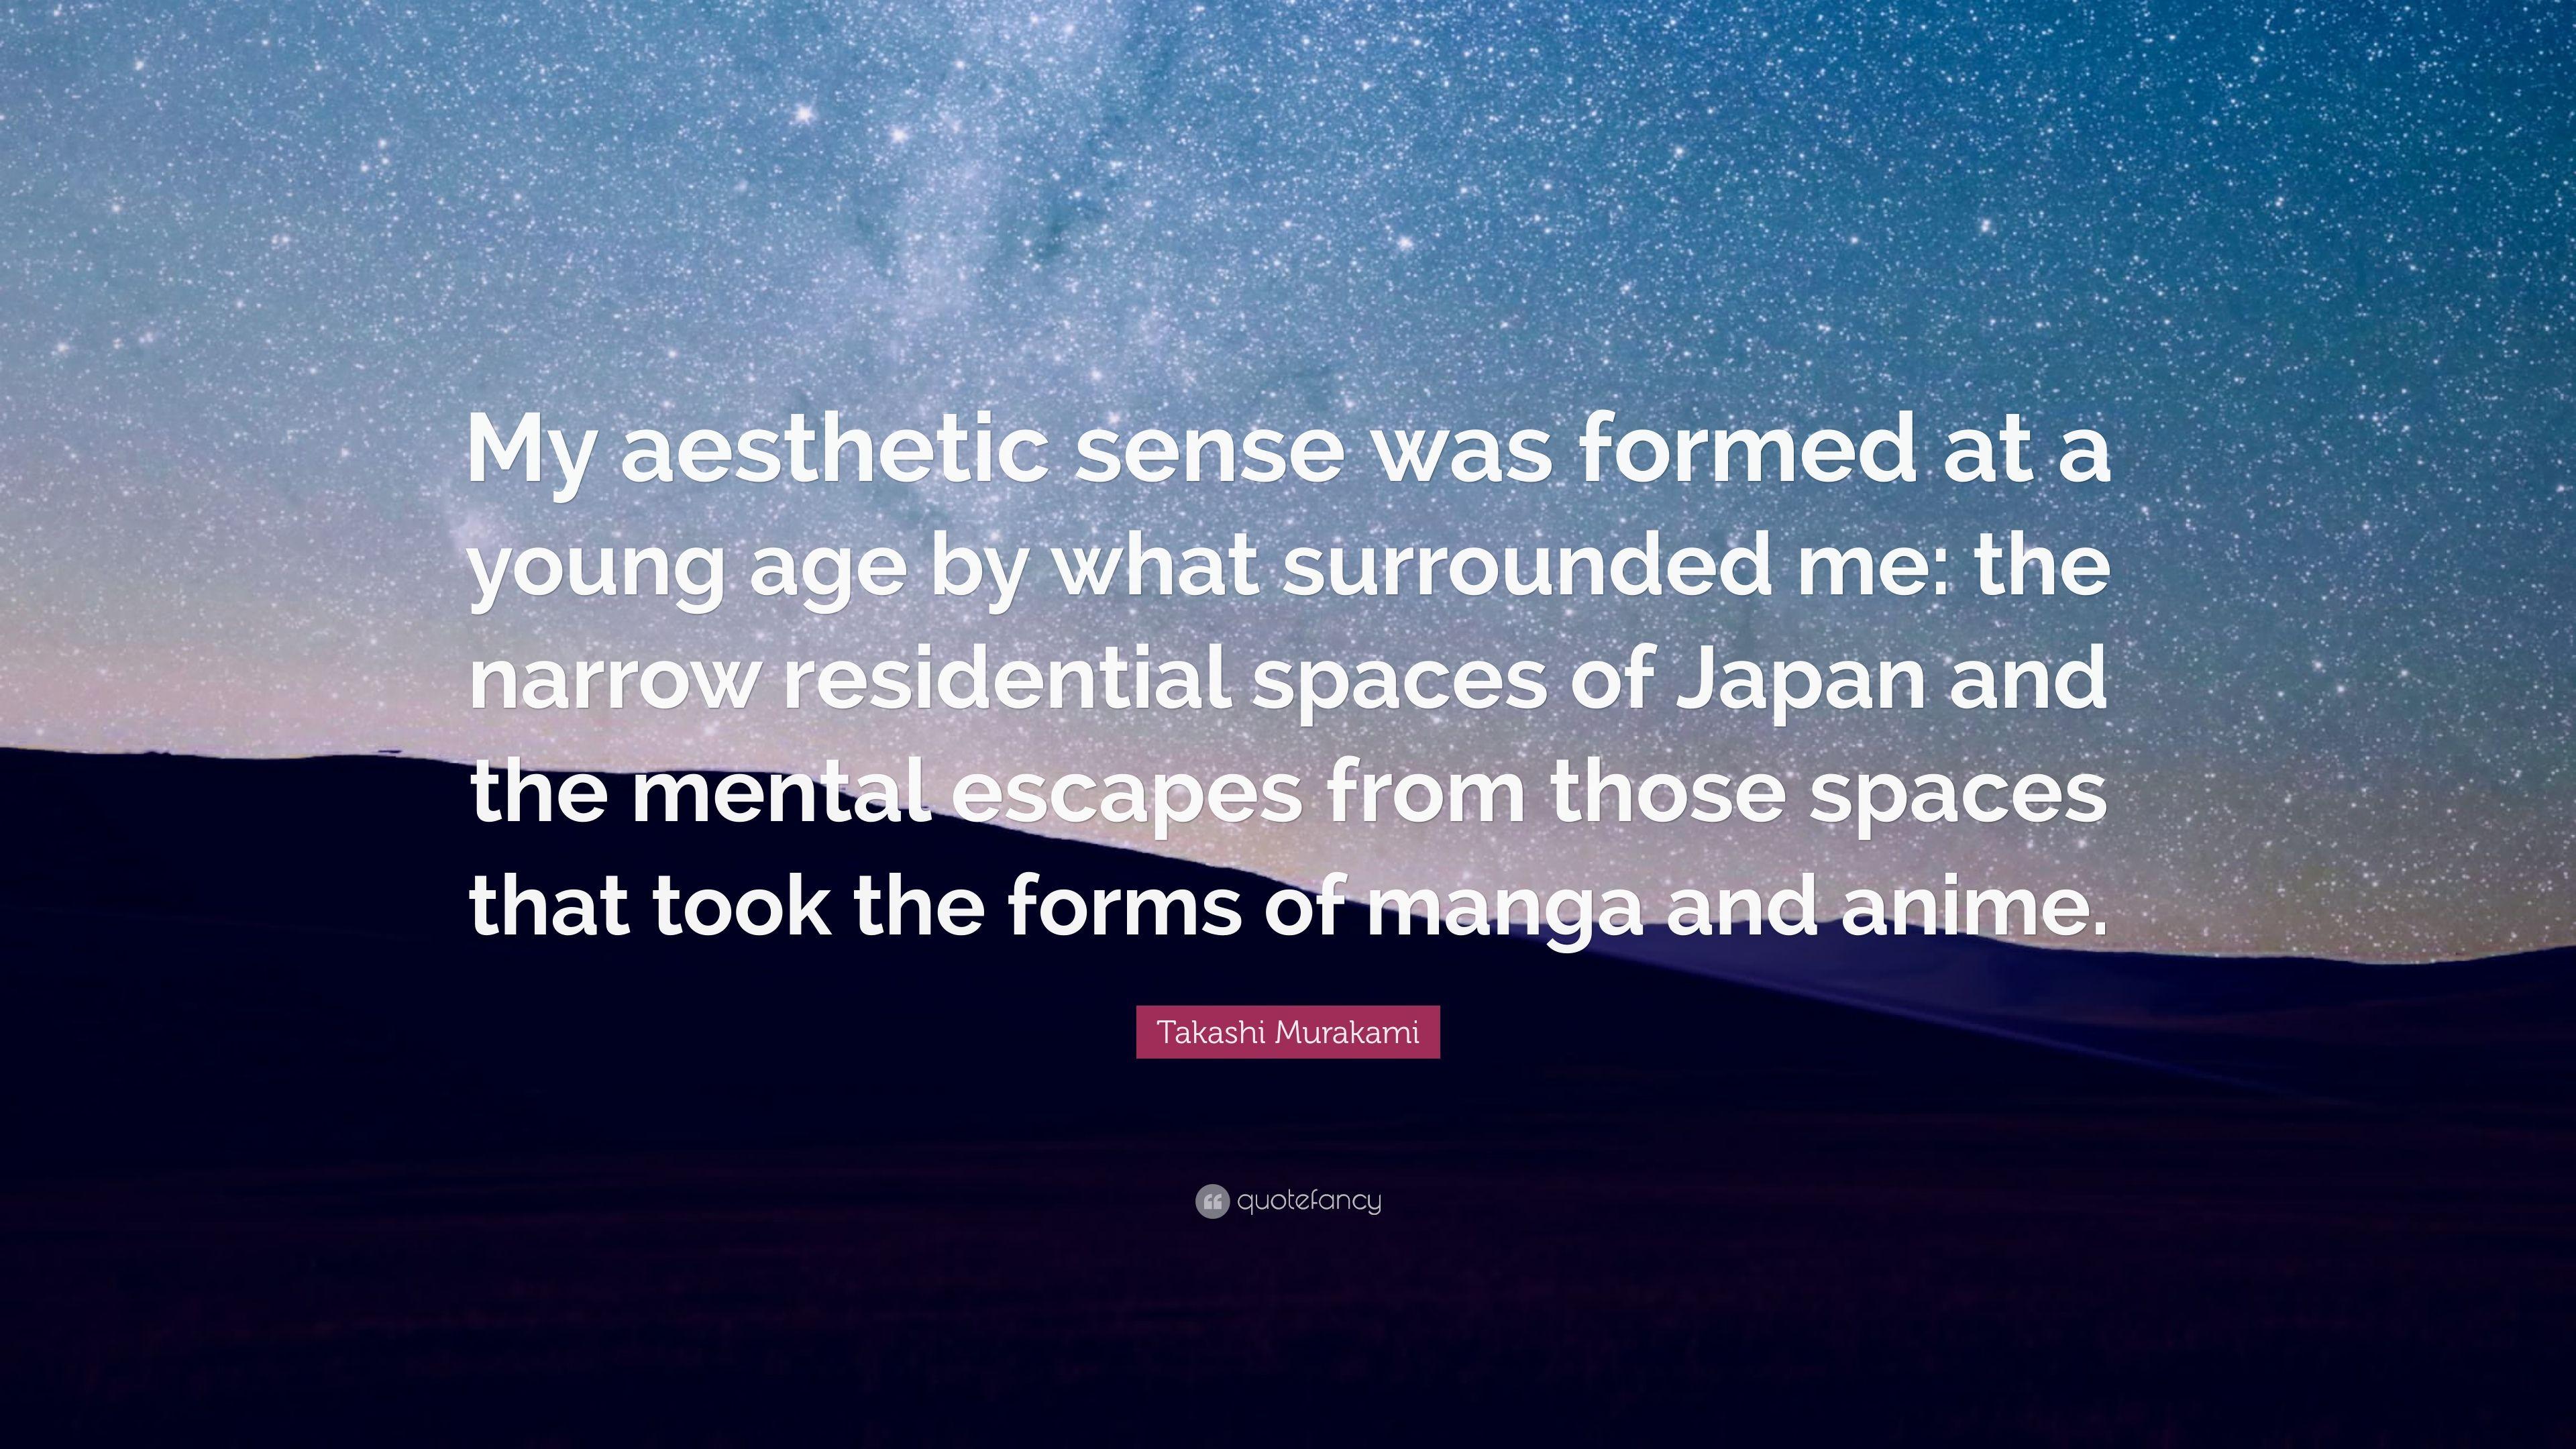 aesthetic wallpapers quote anime murakami takashi formed sense quotefancy japanese spaces inspired